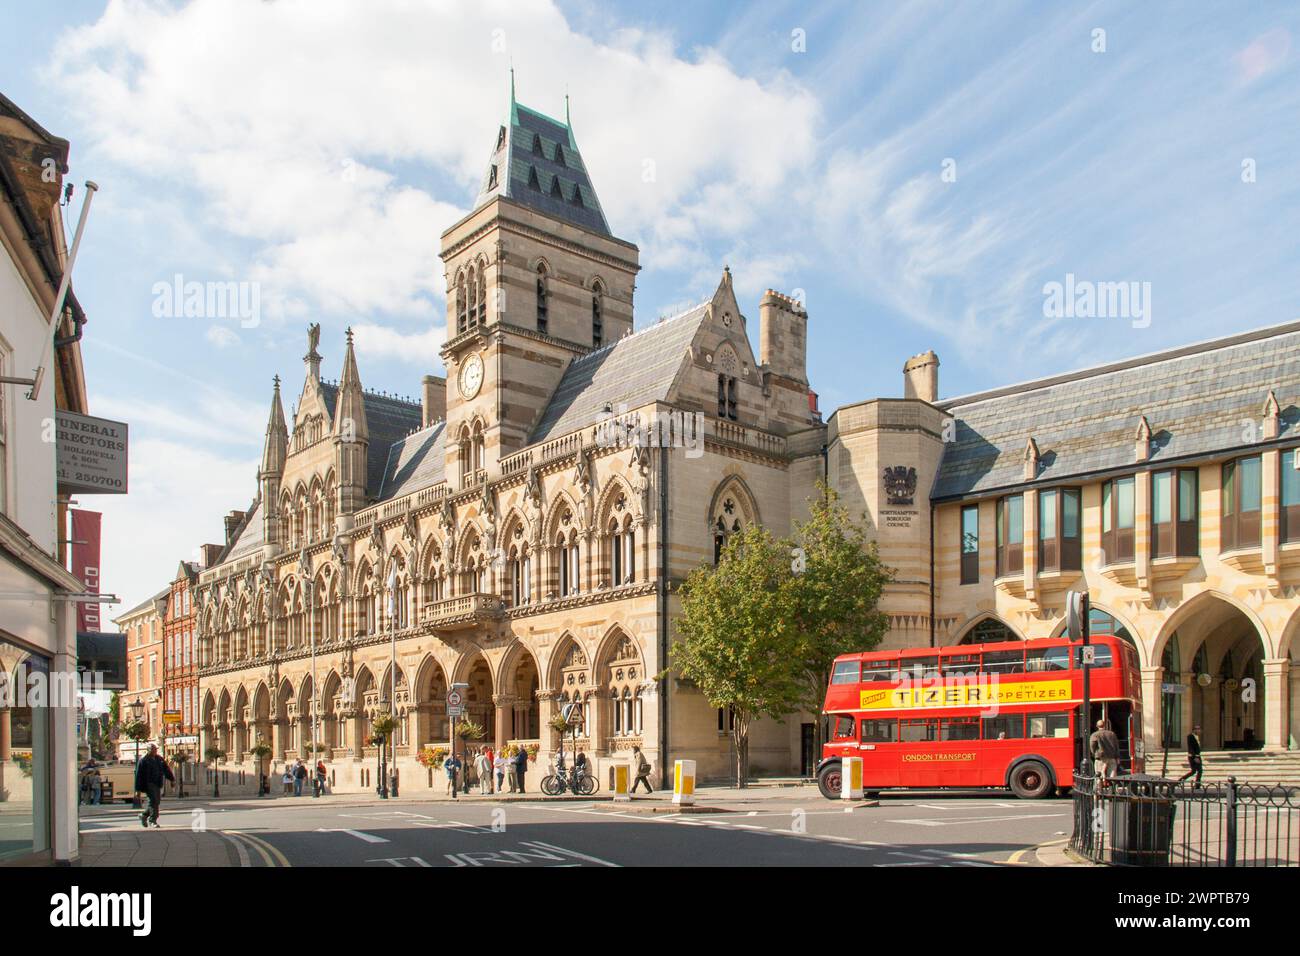 Northampton Town Hall with preserved bus ccx 777 Stock Photo